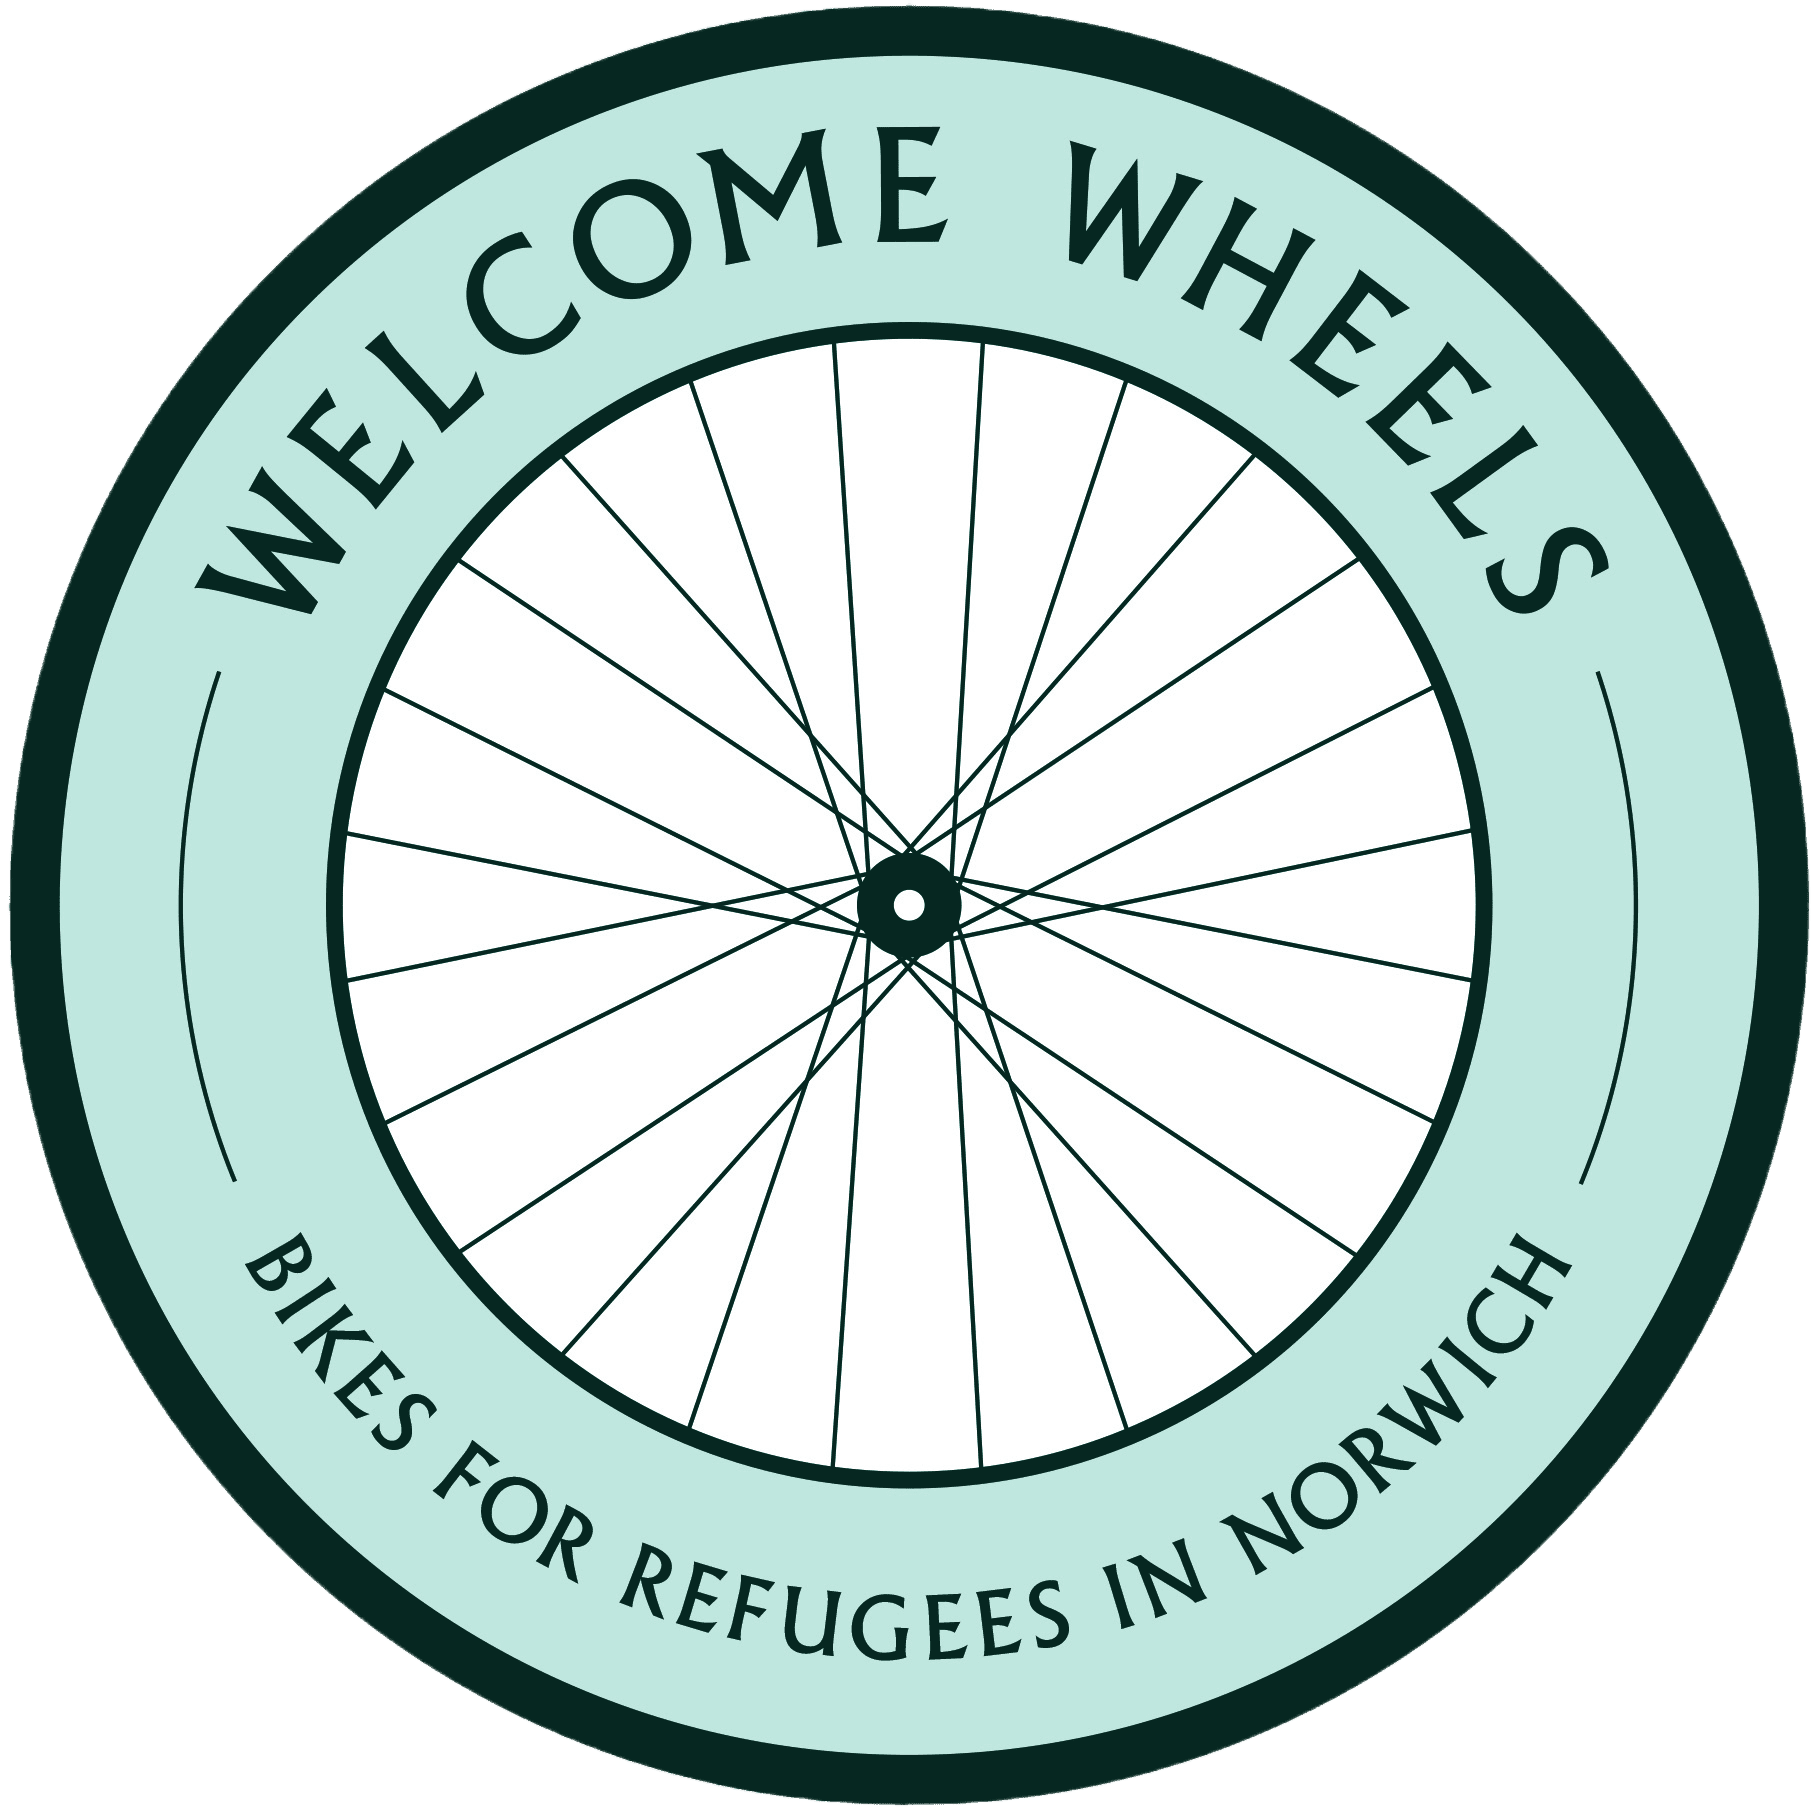 A logo for the Welcome Wheels project.